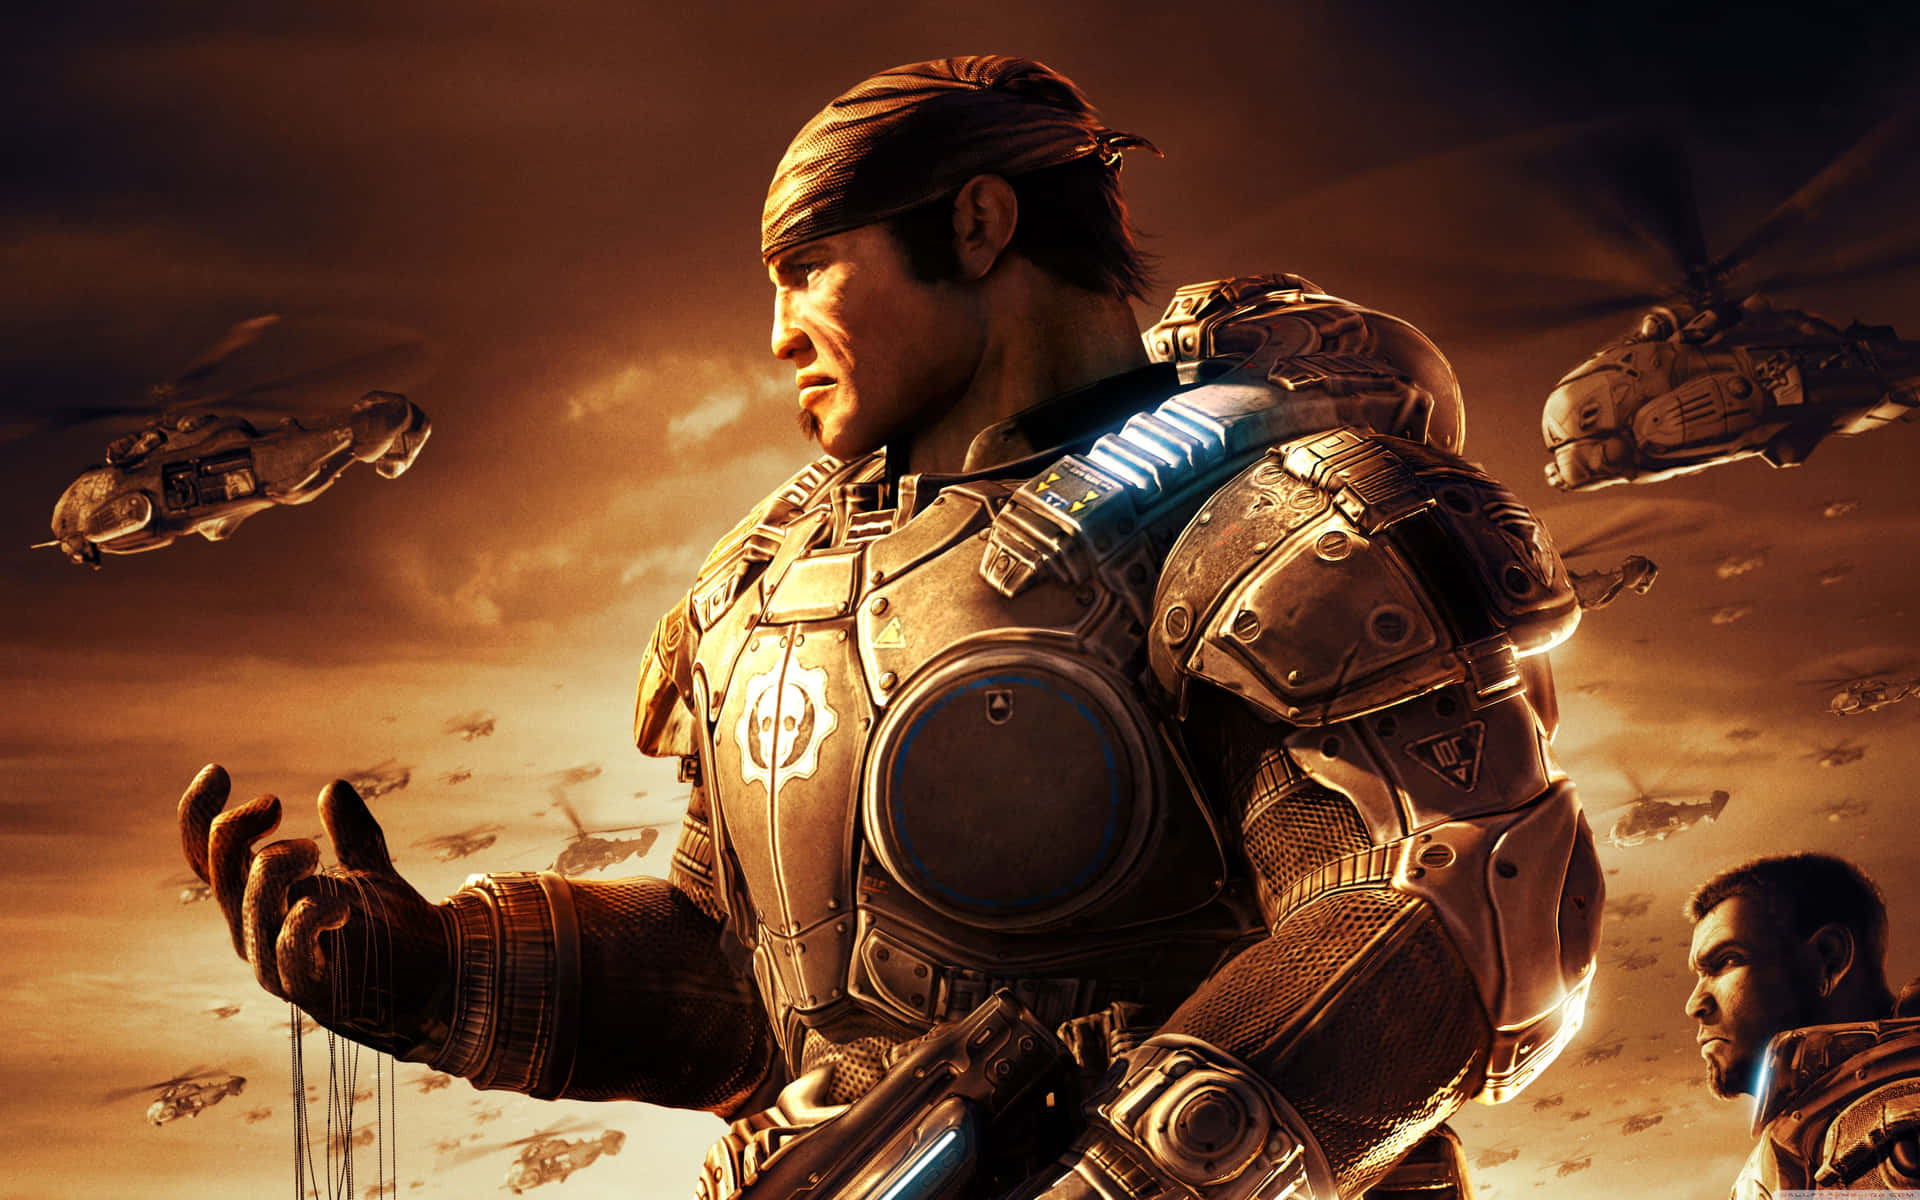 Join the Fight with Gears of War 5